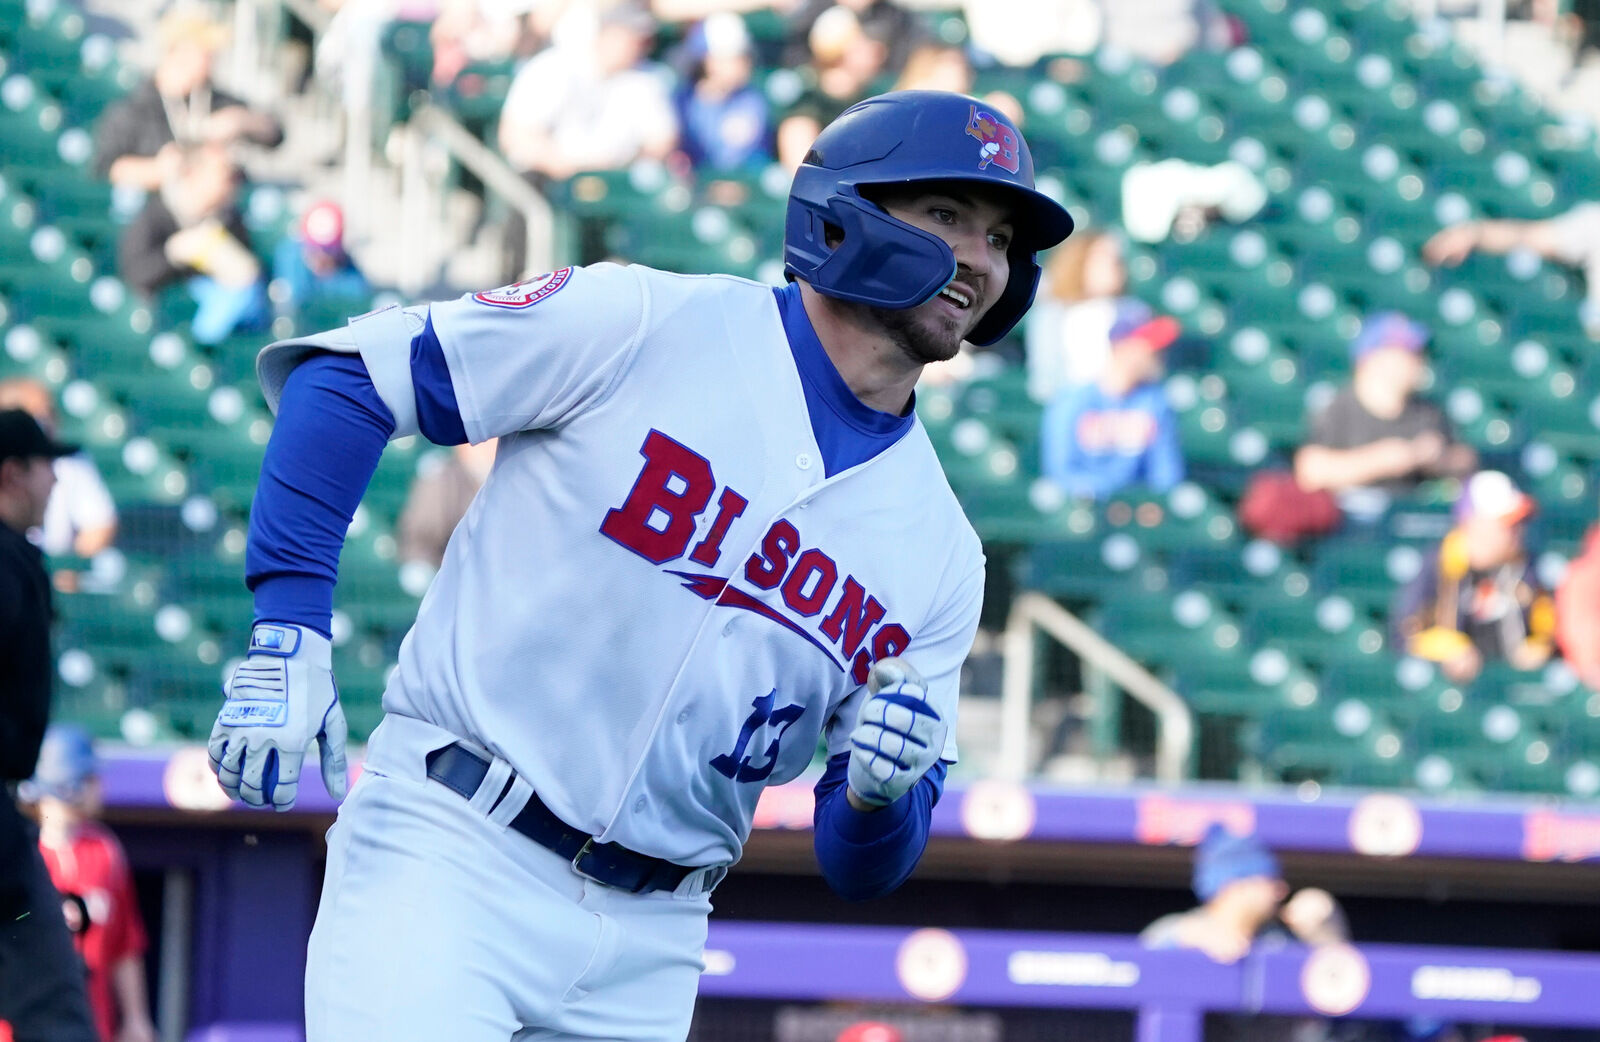 Bisons infielder Spencer Horwitz named International League and Triple-A Player of the Week